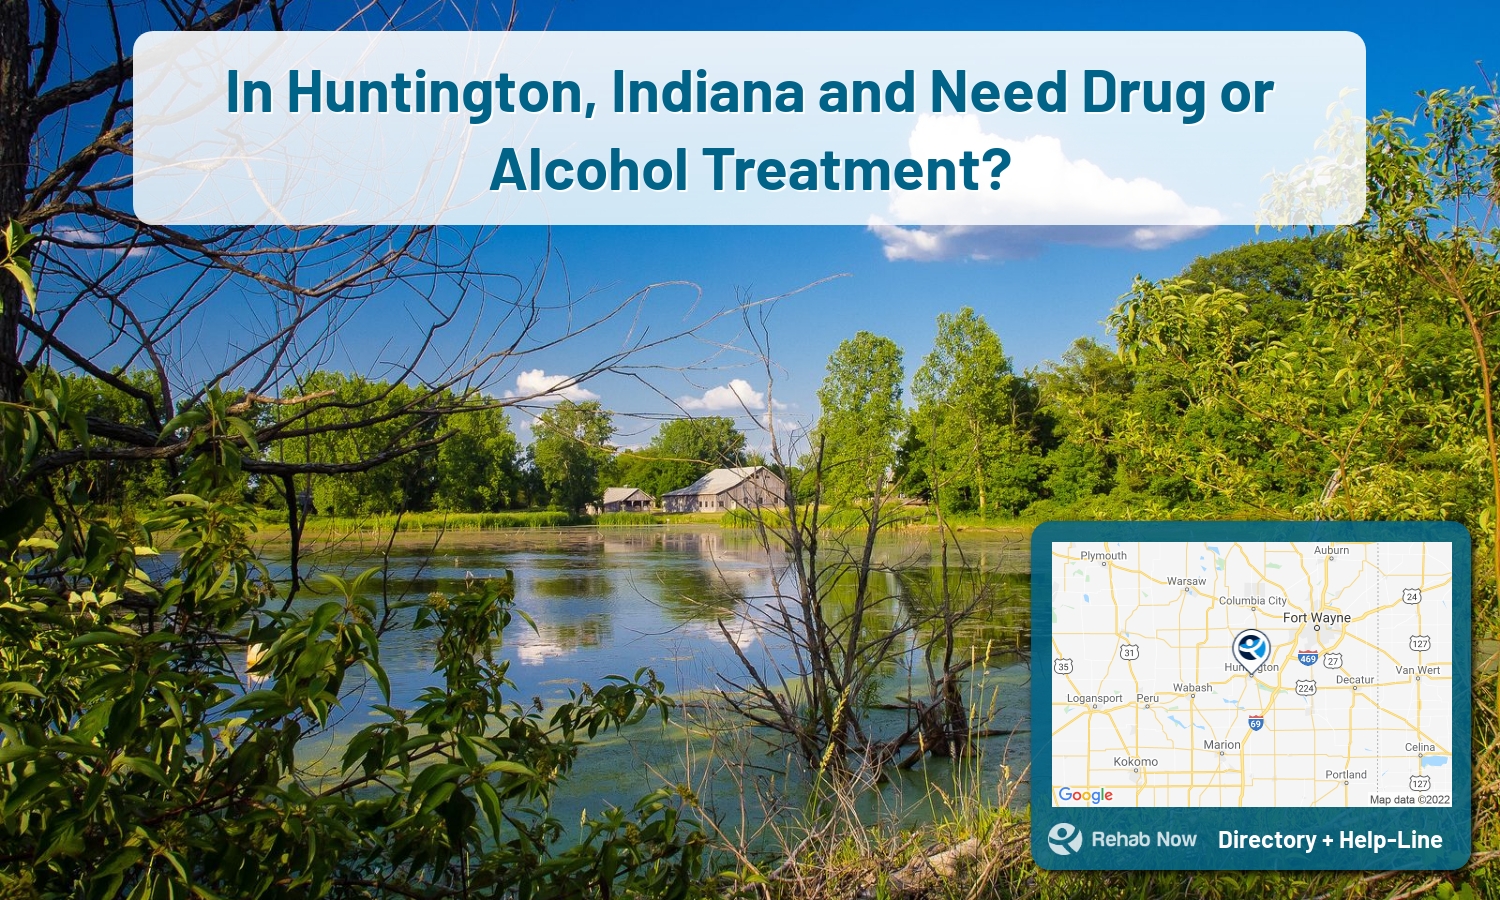 Drug rehab and alcohol treatment services nearby Manistique, MI. Need help choosing a treatment program? Call our free hotline!